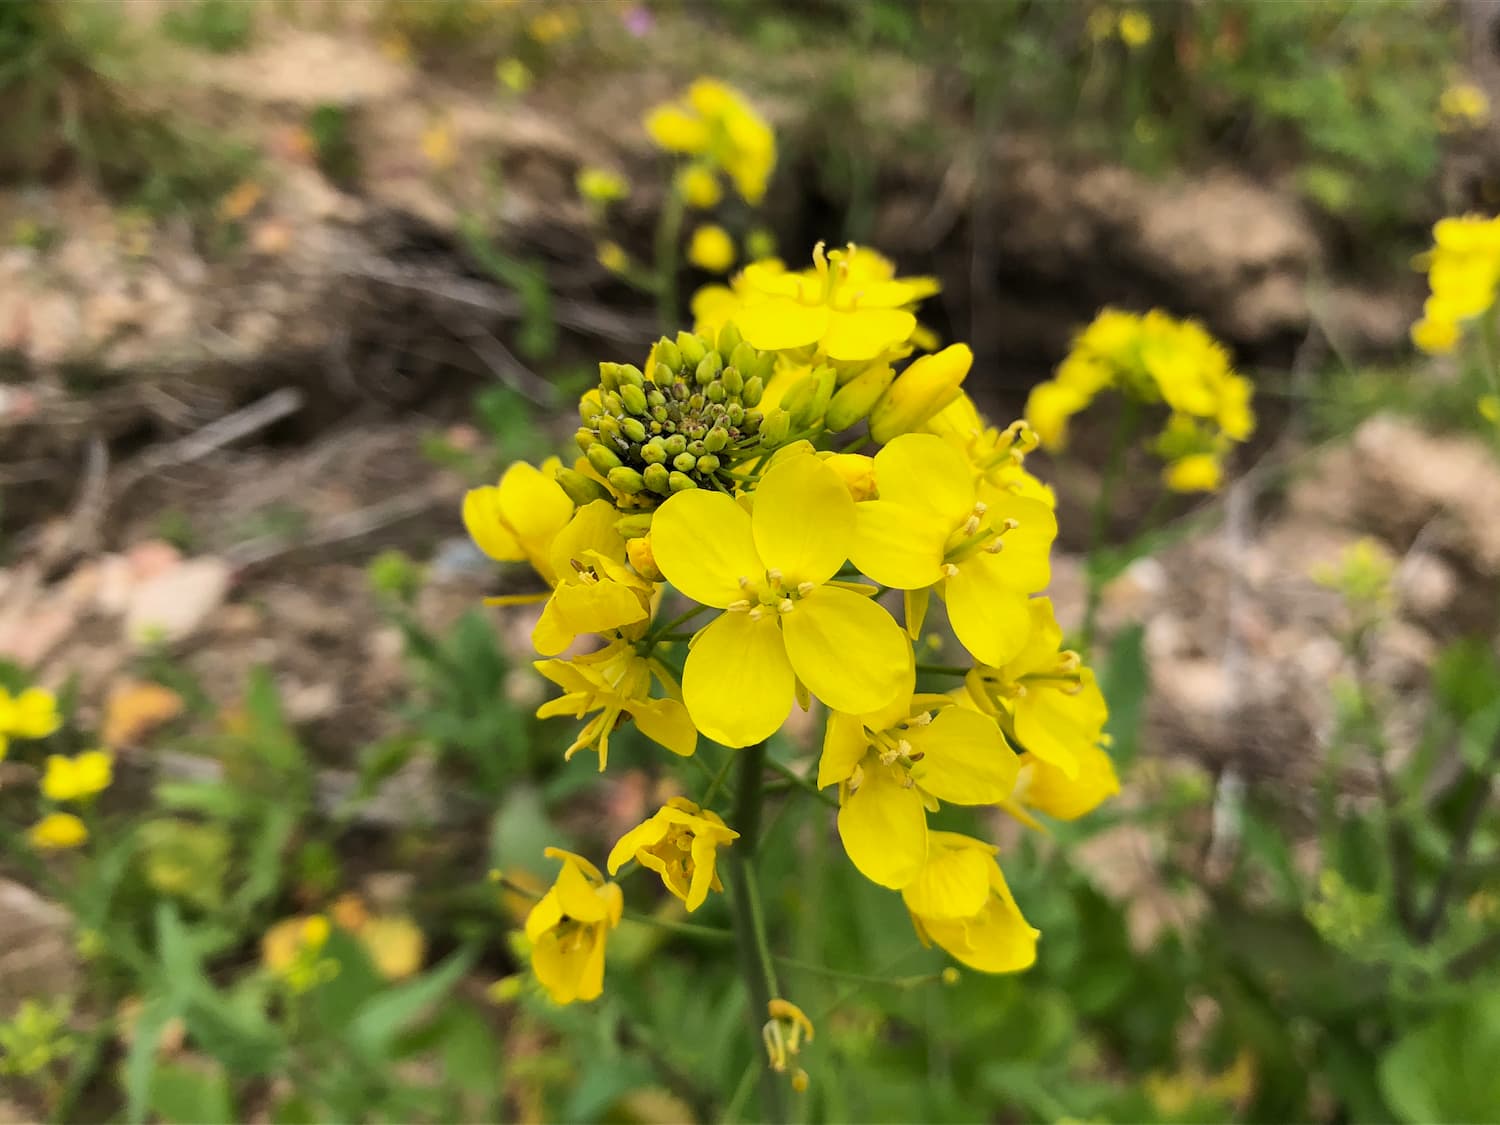 Characteristic four-petaled yellow flowers of wild mustard.